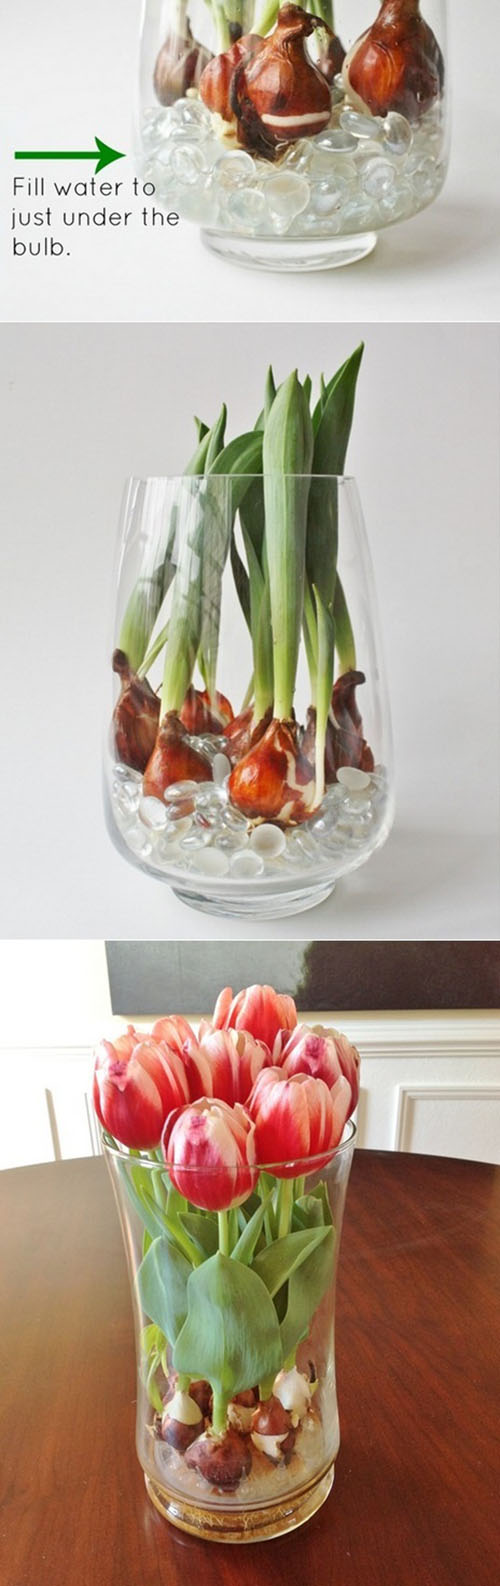 Forcing tulip bulbs in water11.